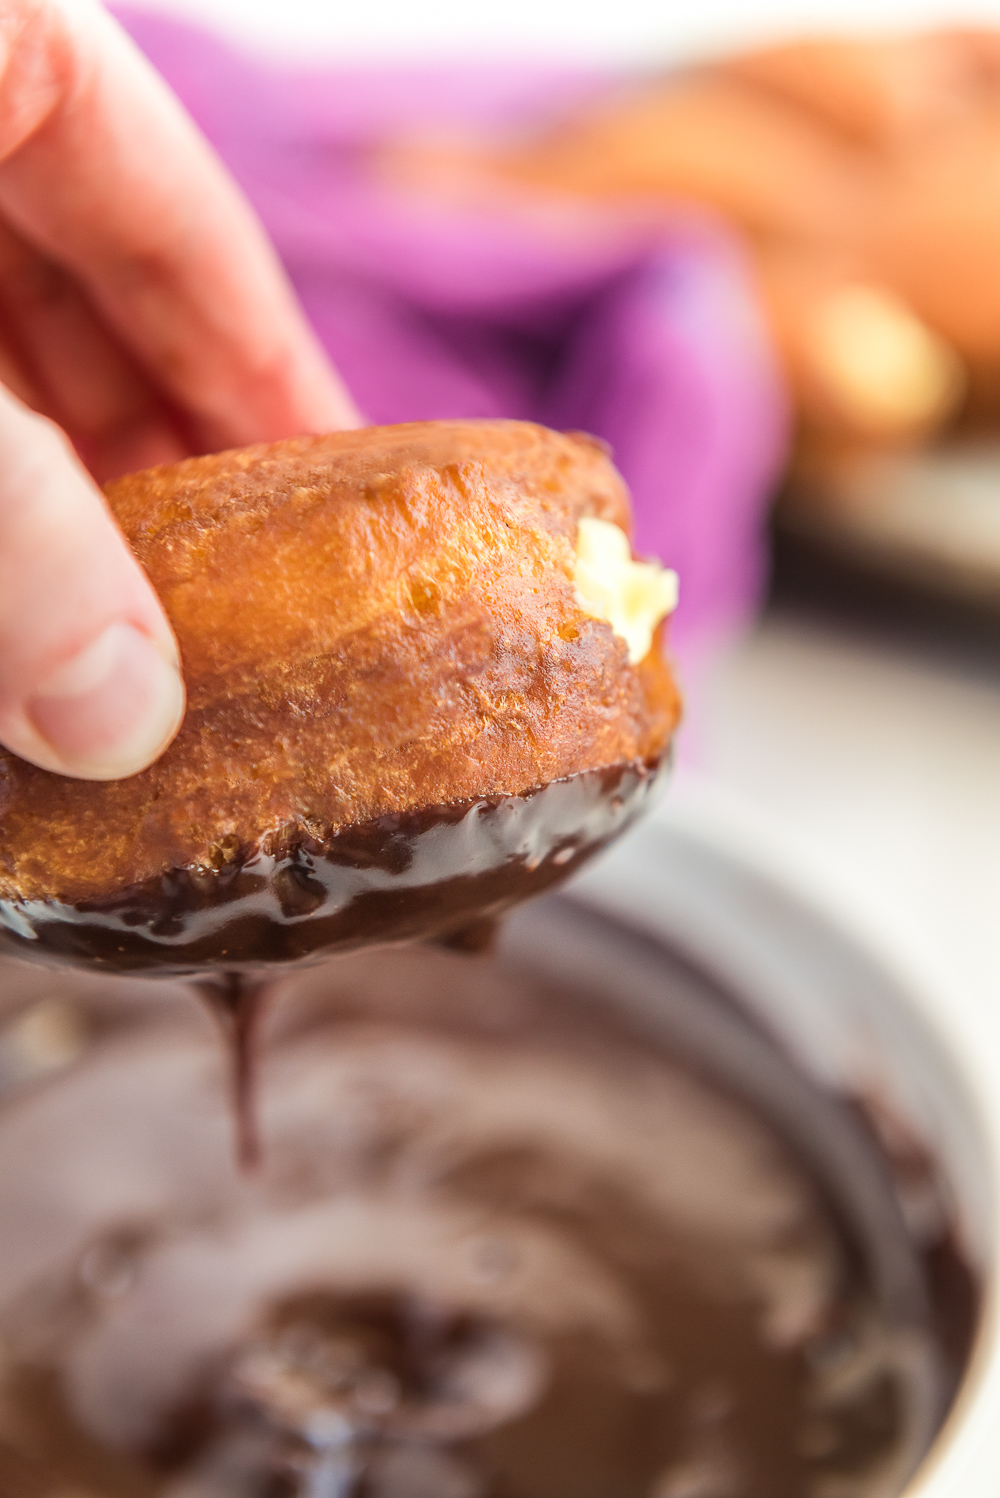 Donut filled with pastry cream being dipped in chocolate ganache.